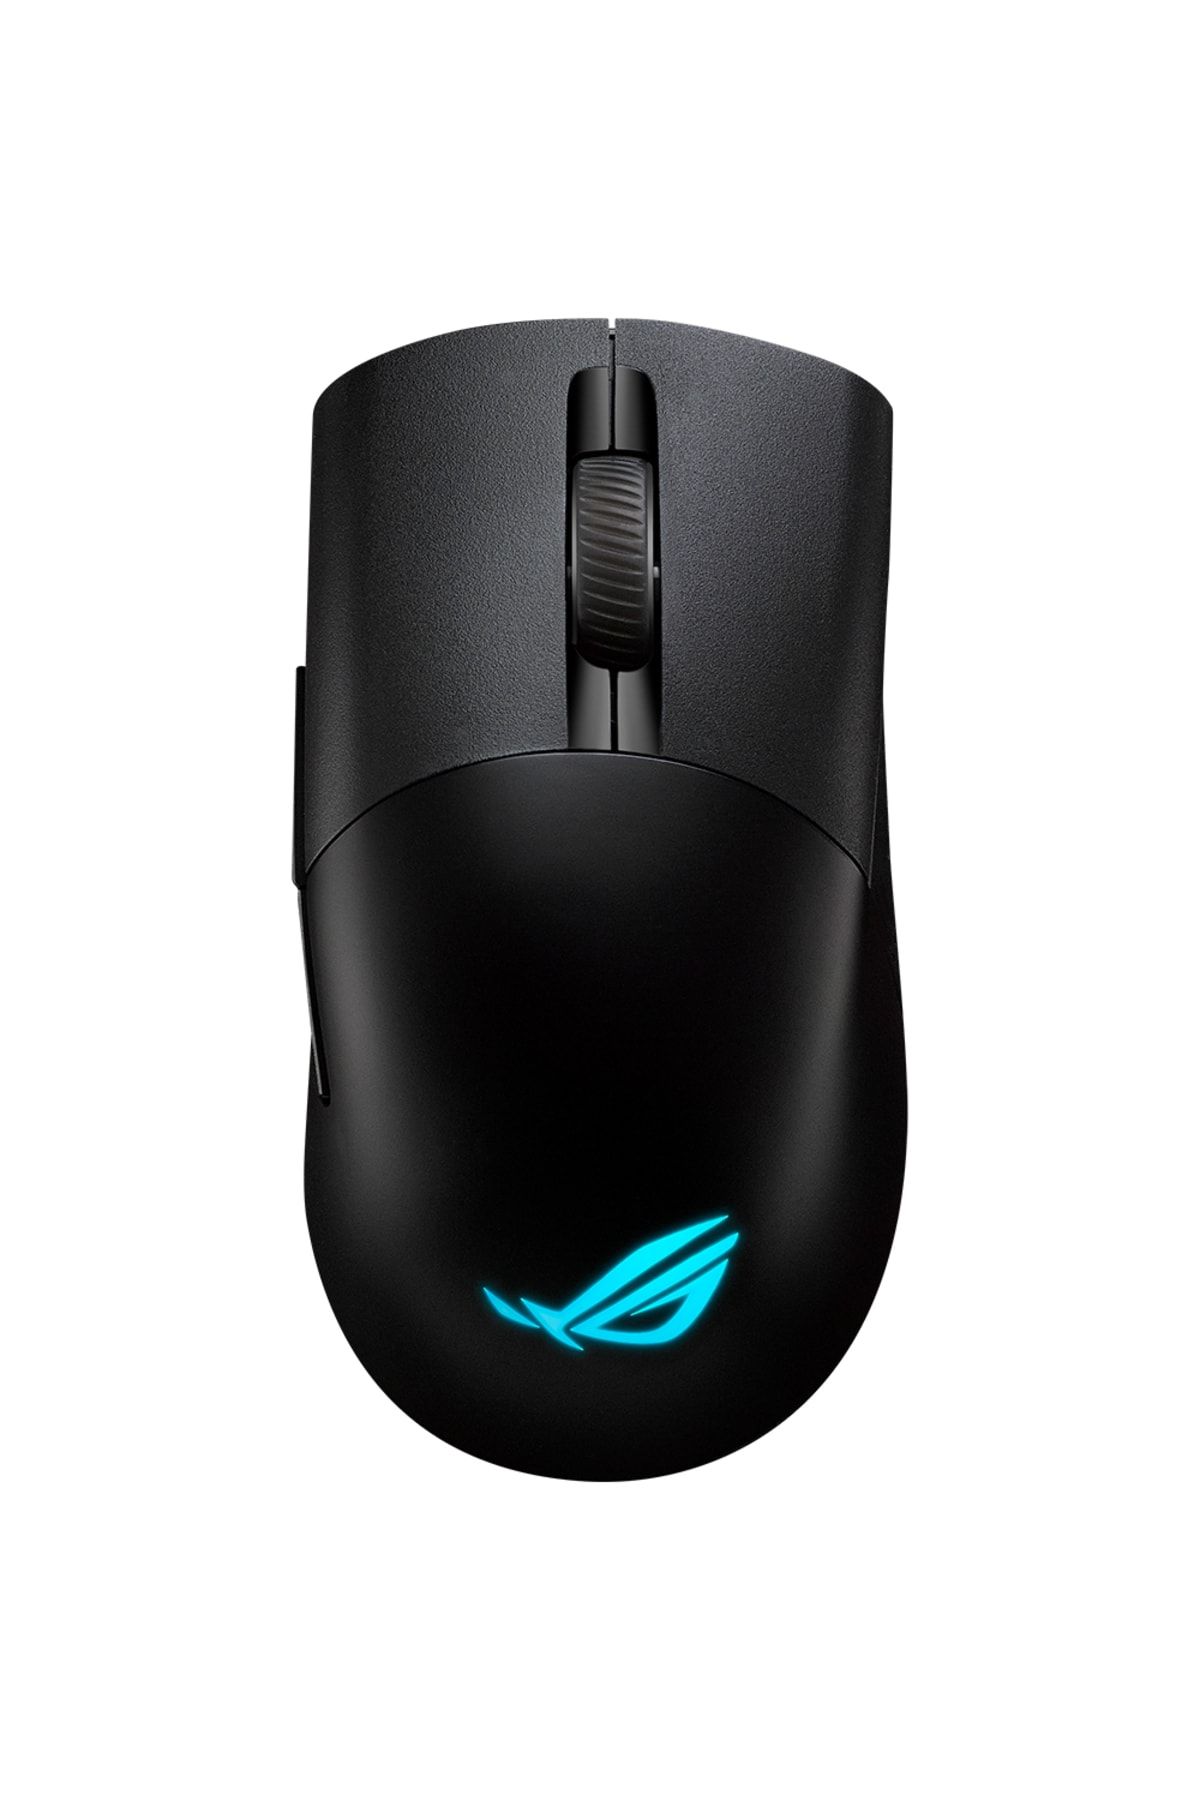 ASUS P709 Rog Keris Rgb Black Wireless Aimpoint Gaming Mouse